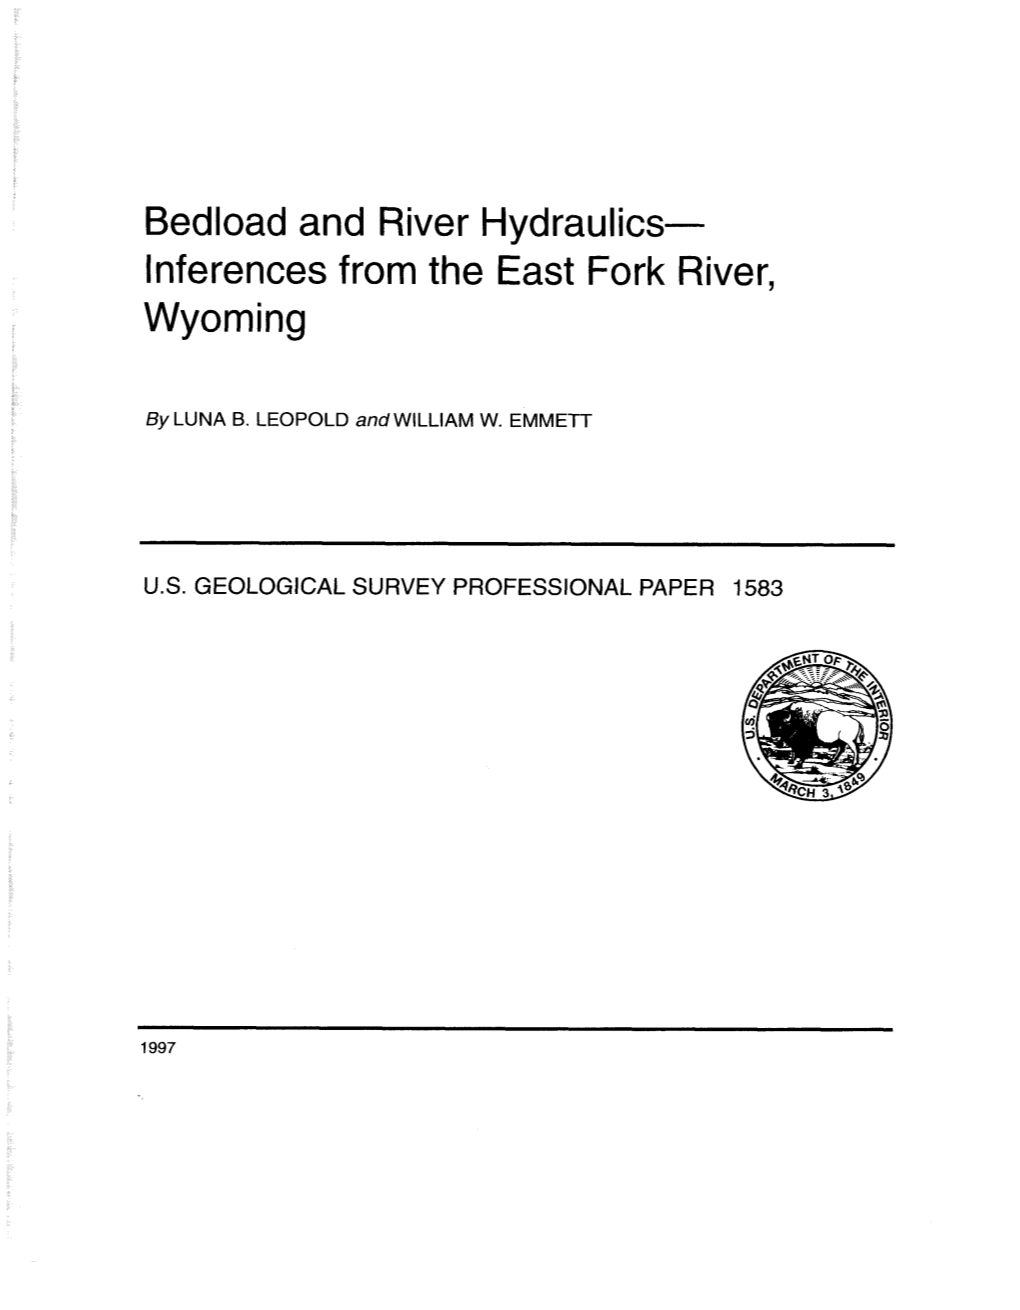 Bedload and River Hydraulics- Inferences from the East Fork River, Wyoming